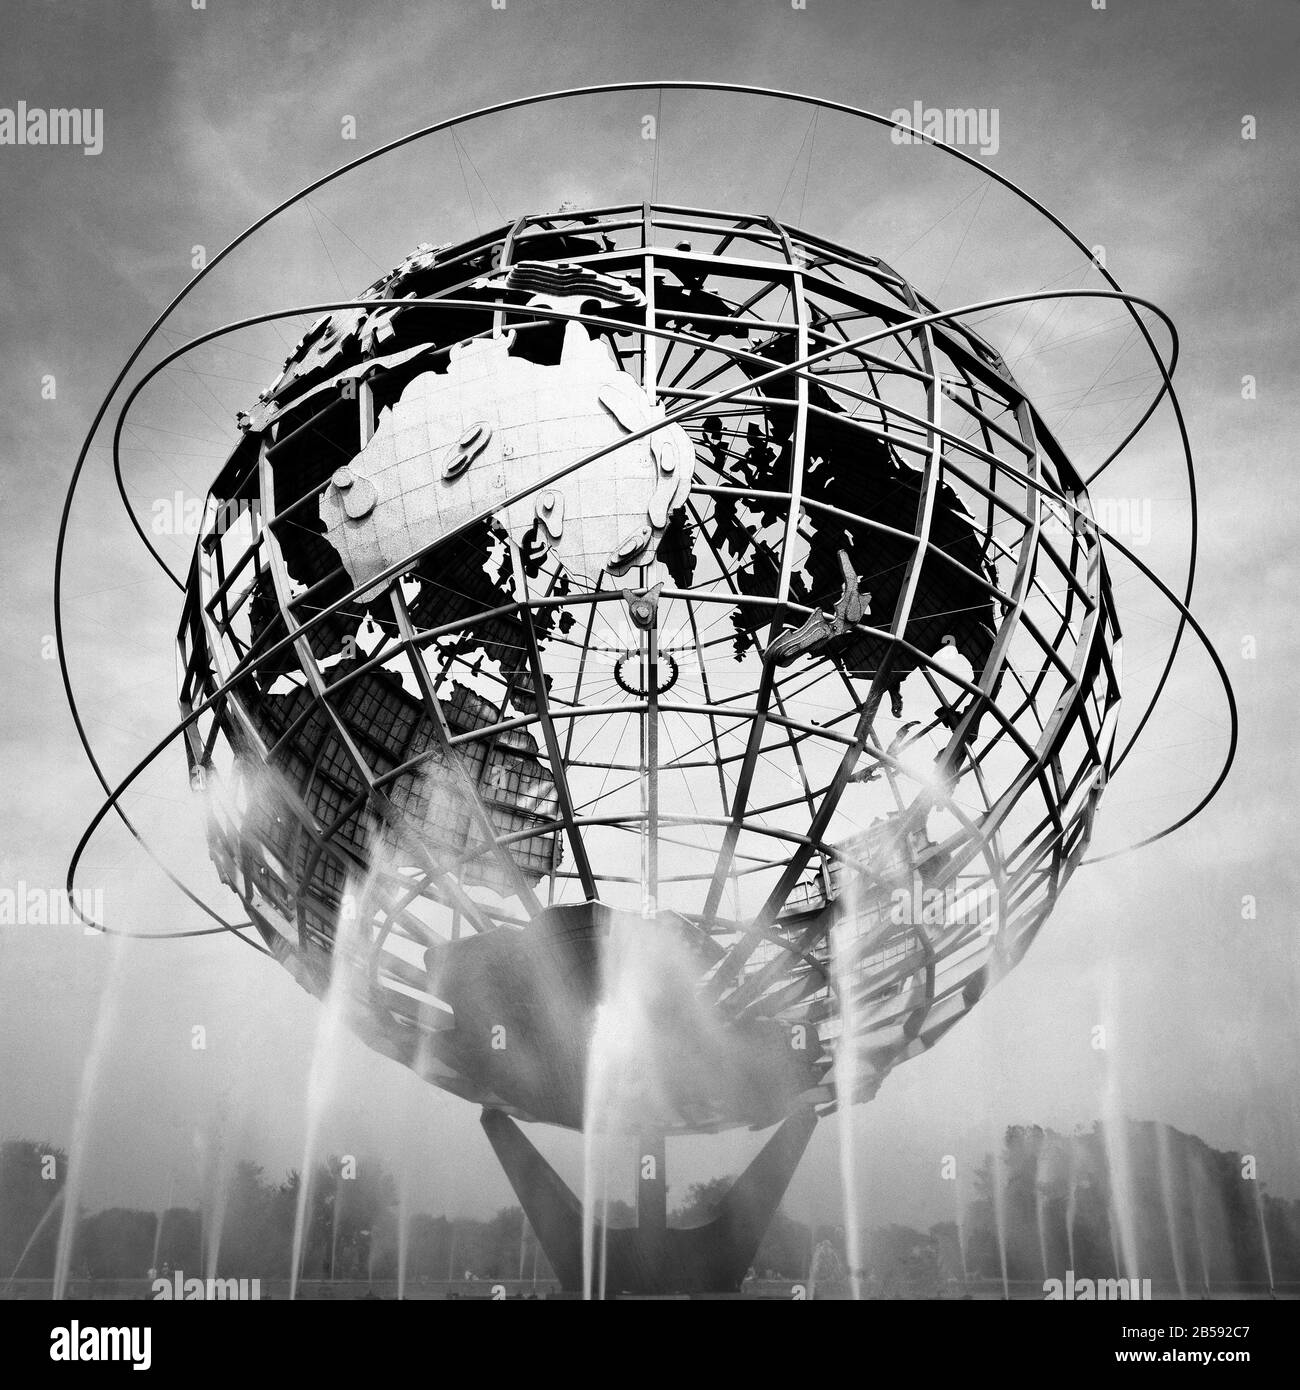 Globe at the 1964 New York World's Fair site in Queens, New York. Stock Photo